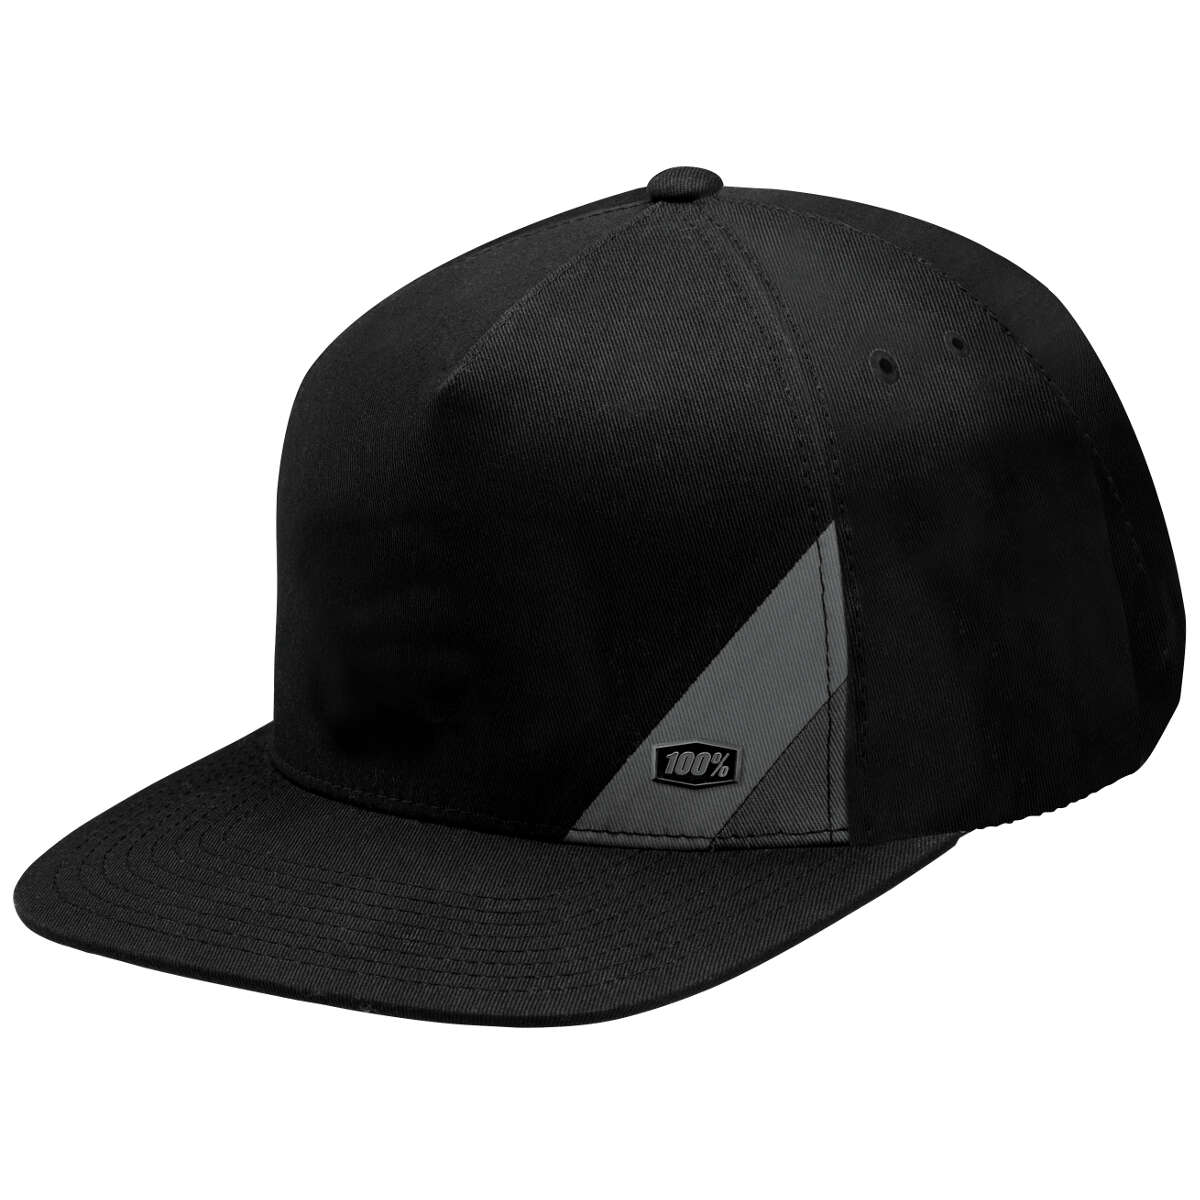 100% Casquette Snap Back Waxed Black